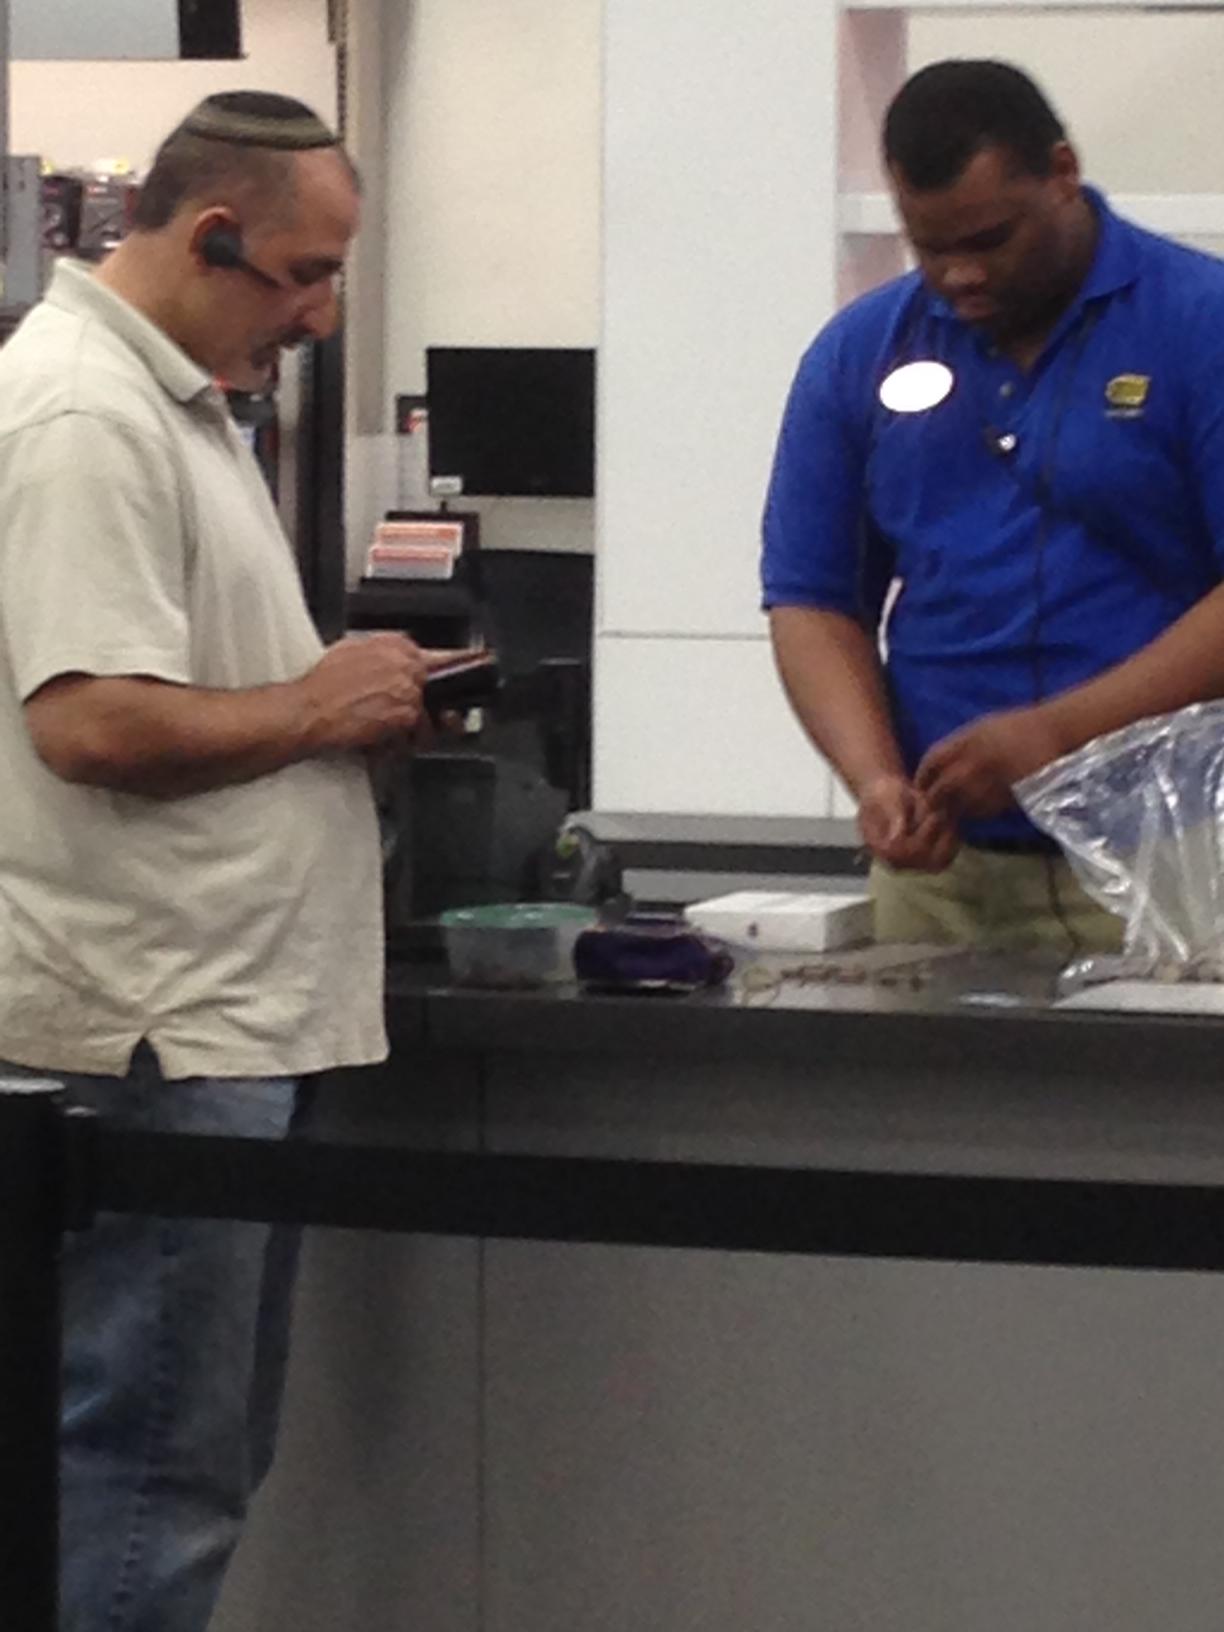 This guy paid for his iPad Mini entirely in quarters. The cashier was counting there for 15 minutes